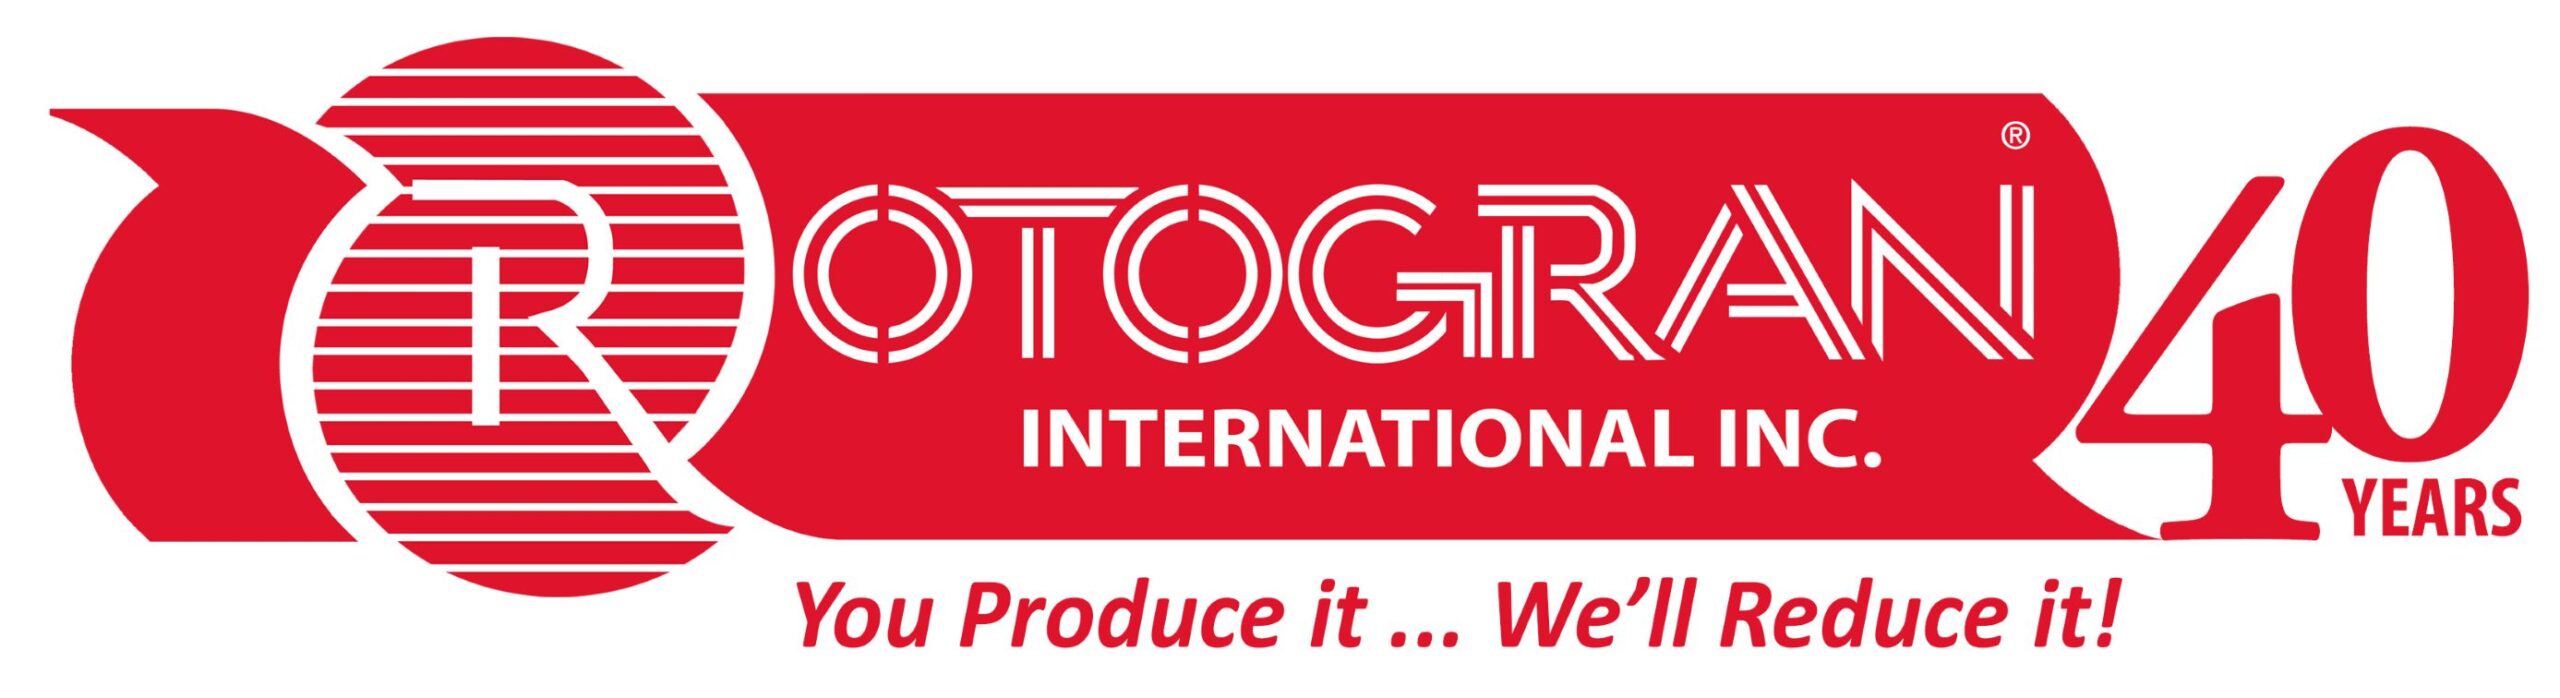 ROTOGRAN_logo40years_with-slogan-2-EMAIL